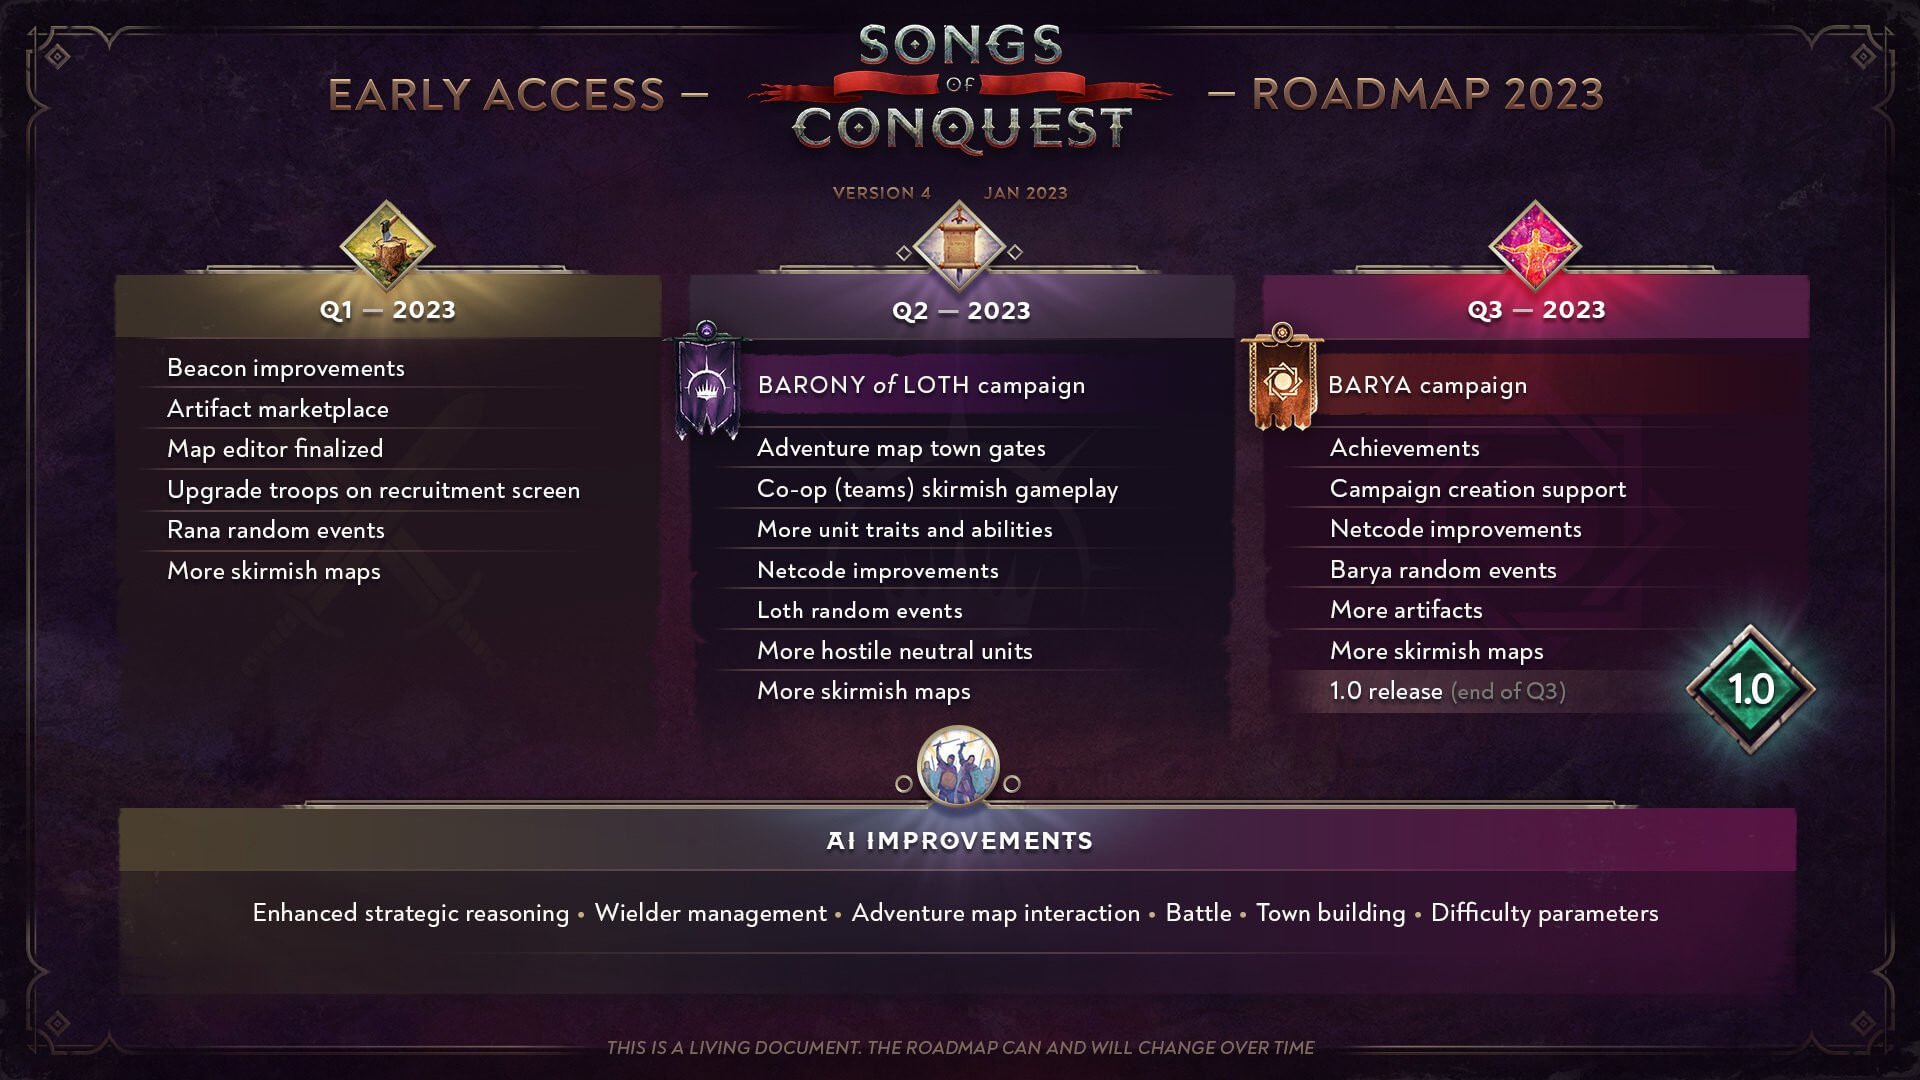 The 2023 roadmap for Songs of Conquest, which promises a lot of new content